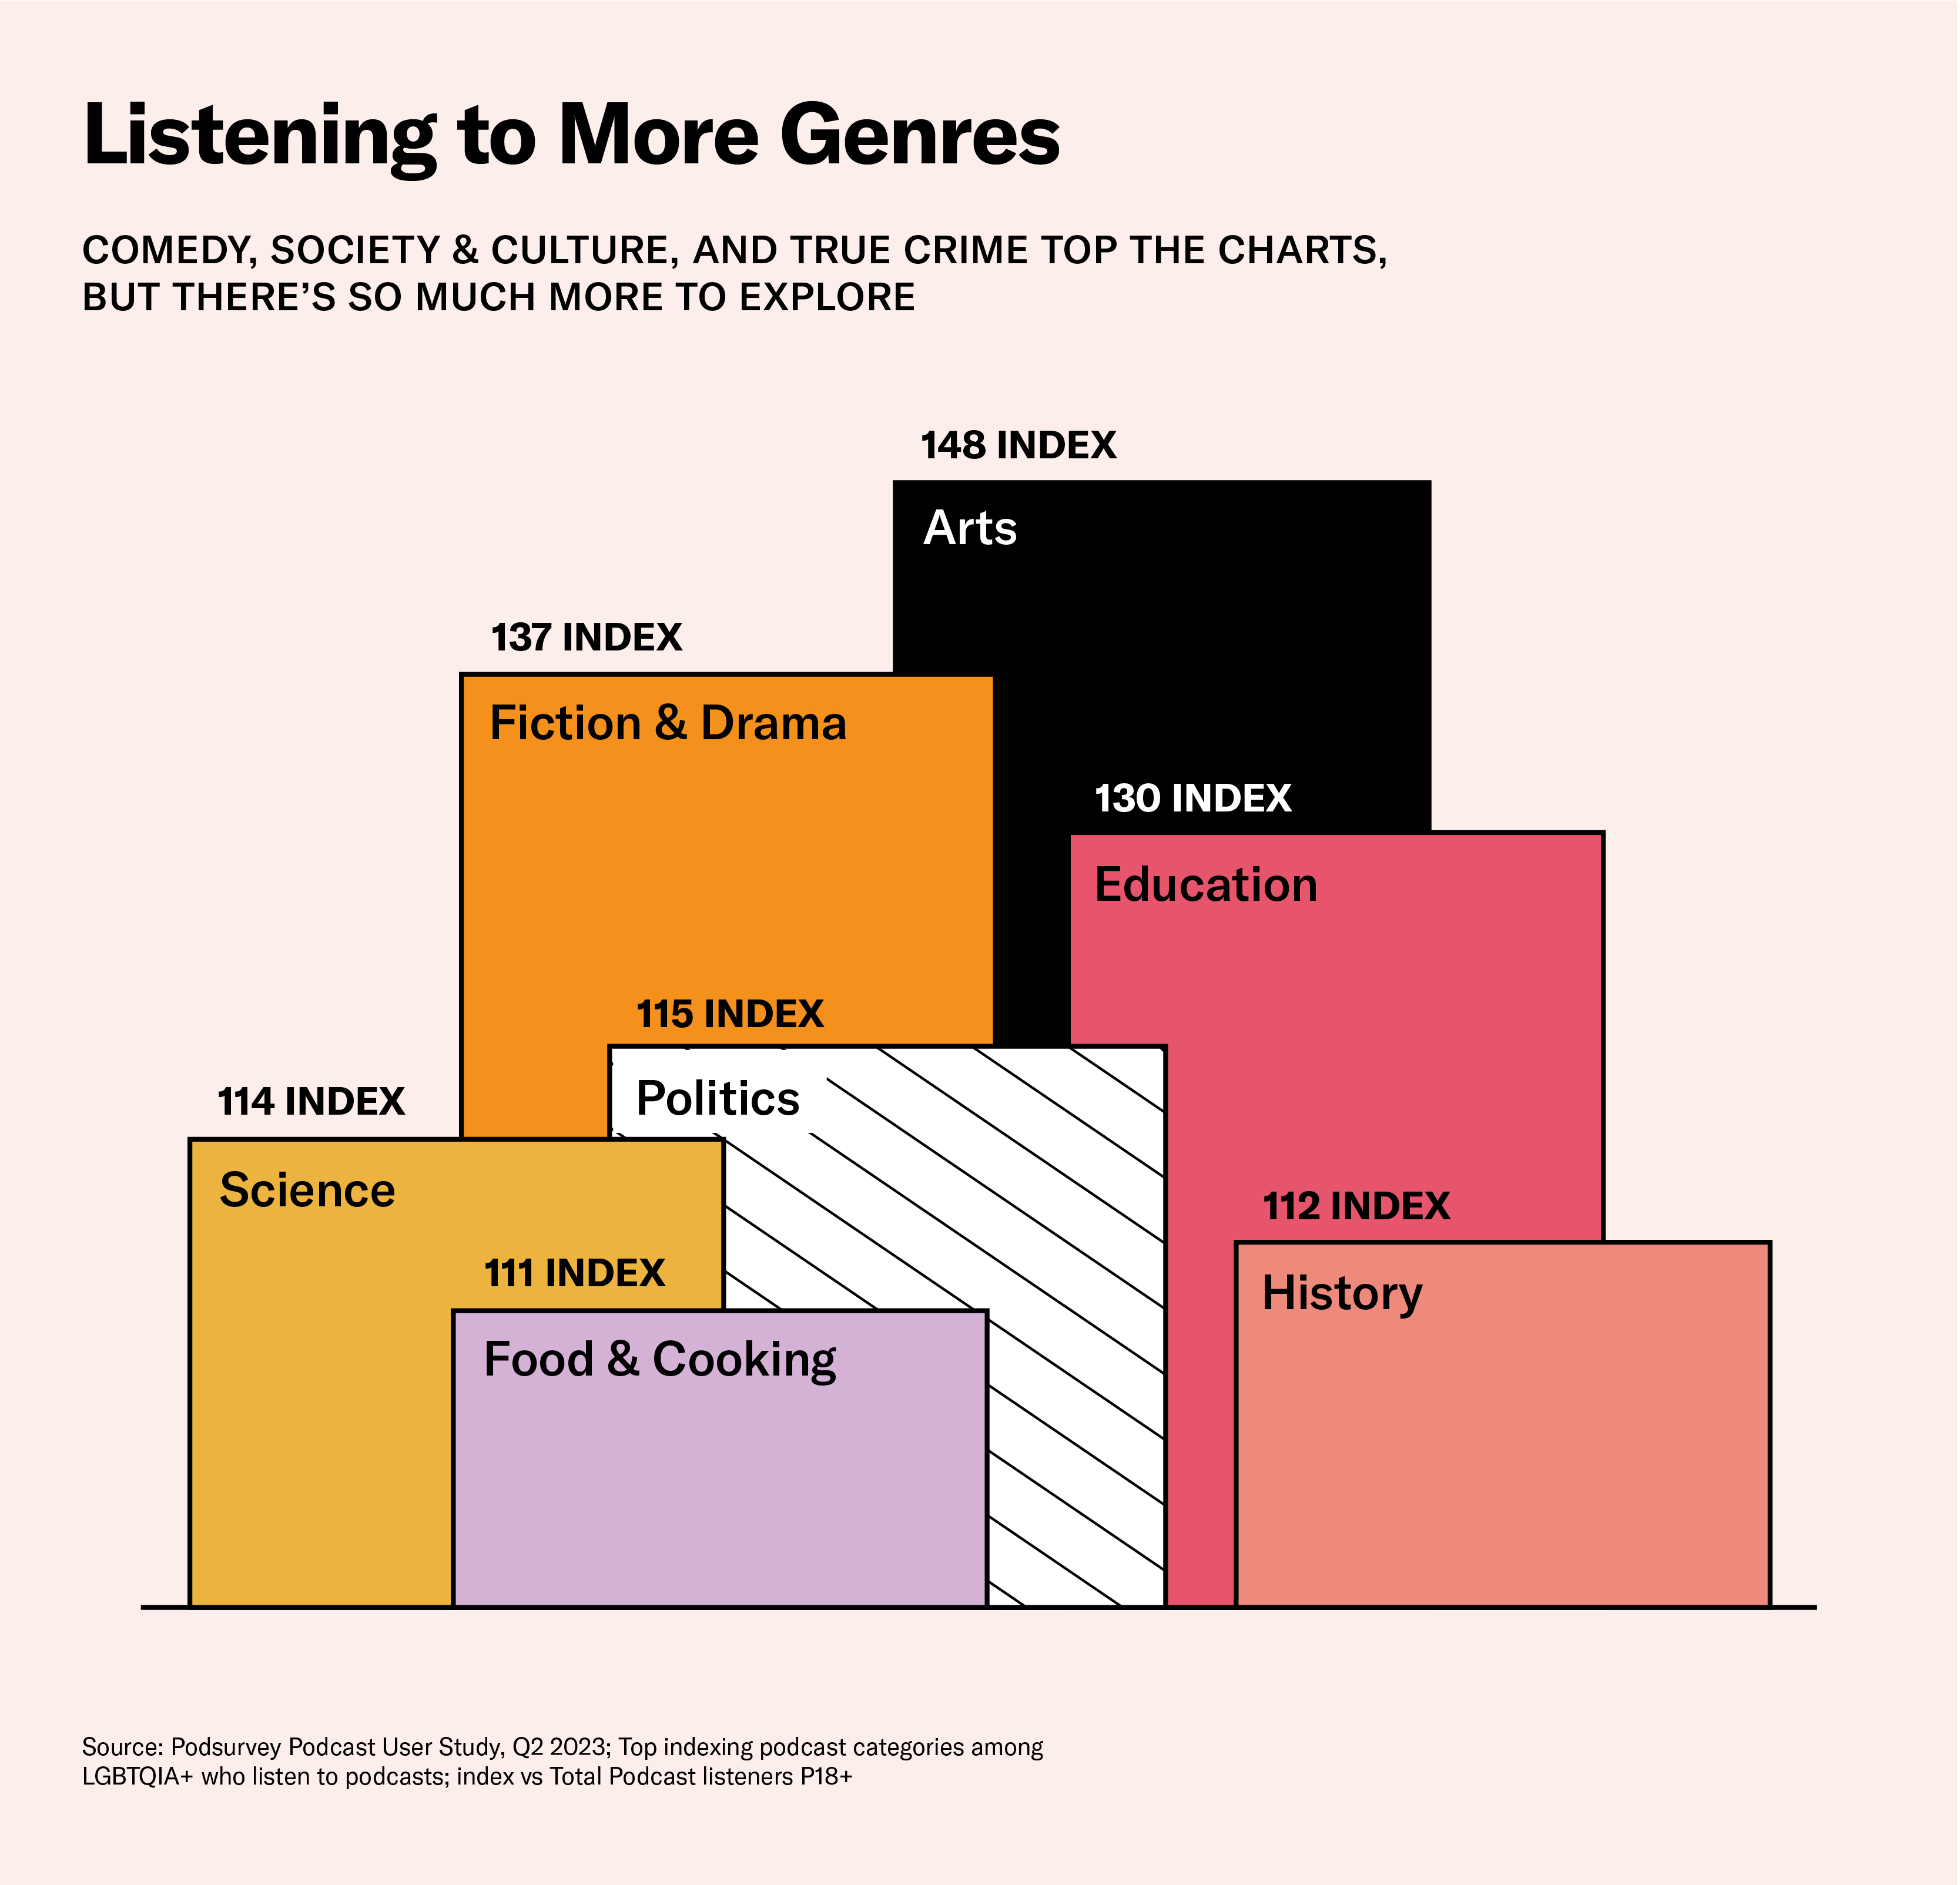 LGBTQIA+ podcast listeners listen to more genres